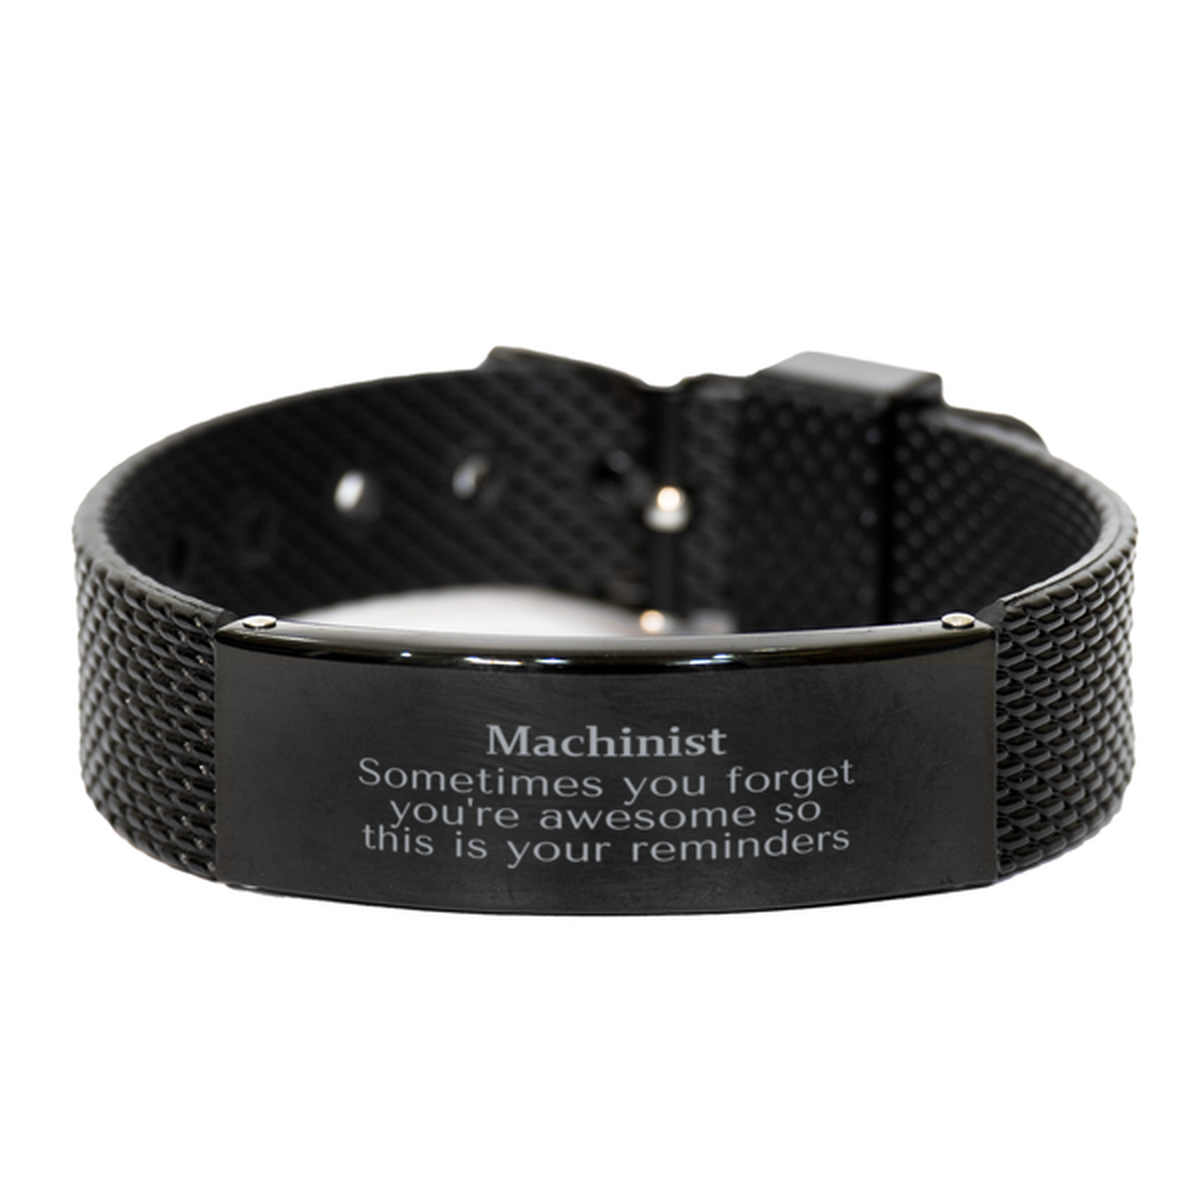 Sentimental Machinist Black Shark Mesh Bracelet, Machinist Sometimes you forget you're awesome so this is your reminders, Graduation Christmas Birthday Gifts for Machinist, Men, Women, Coworkers